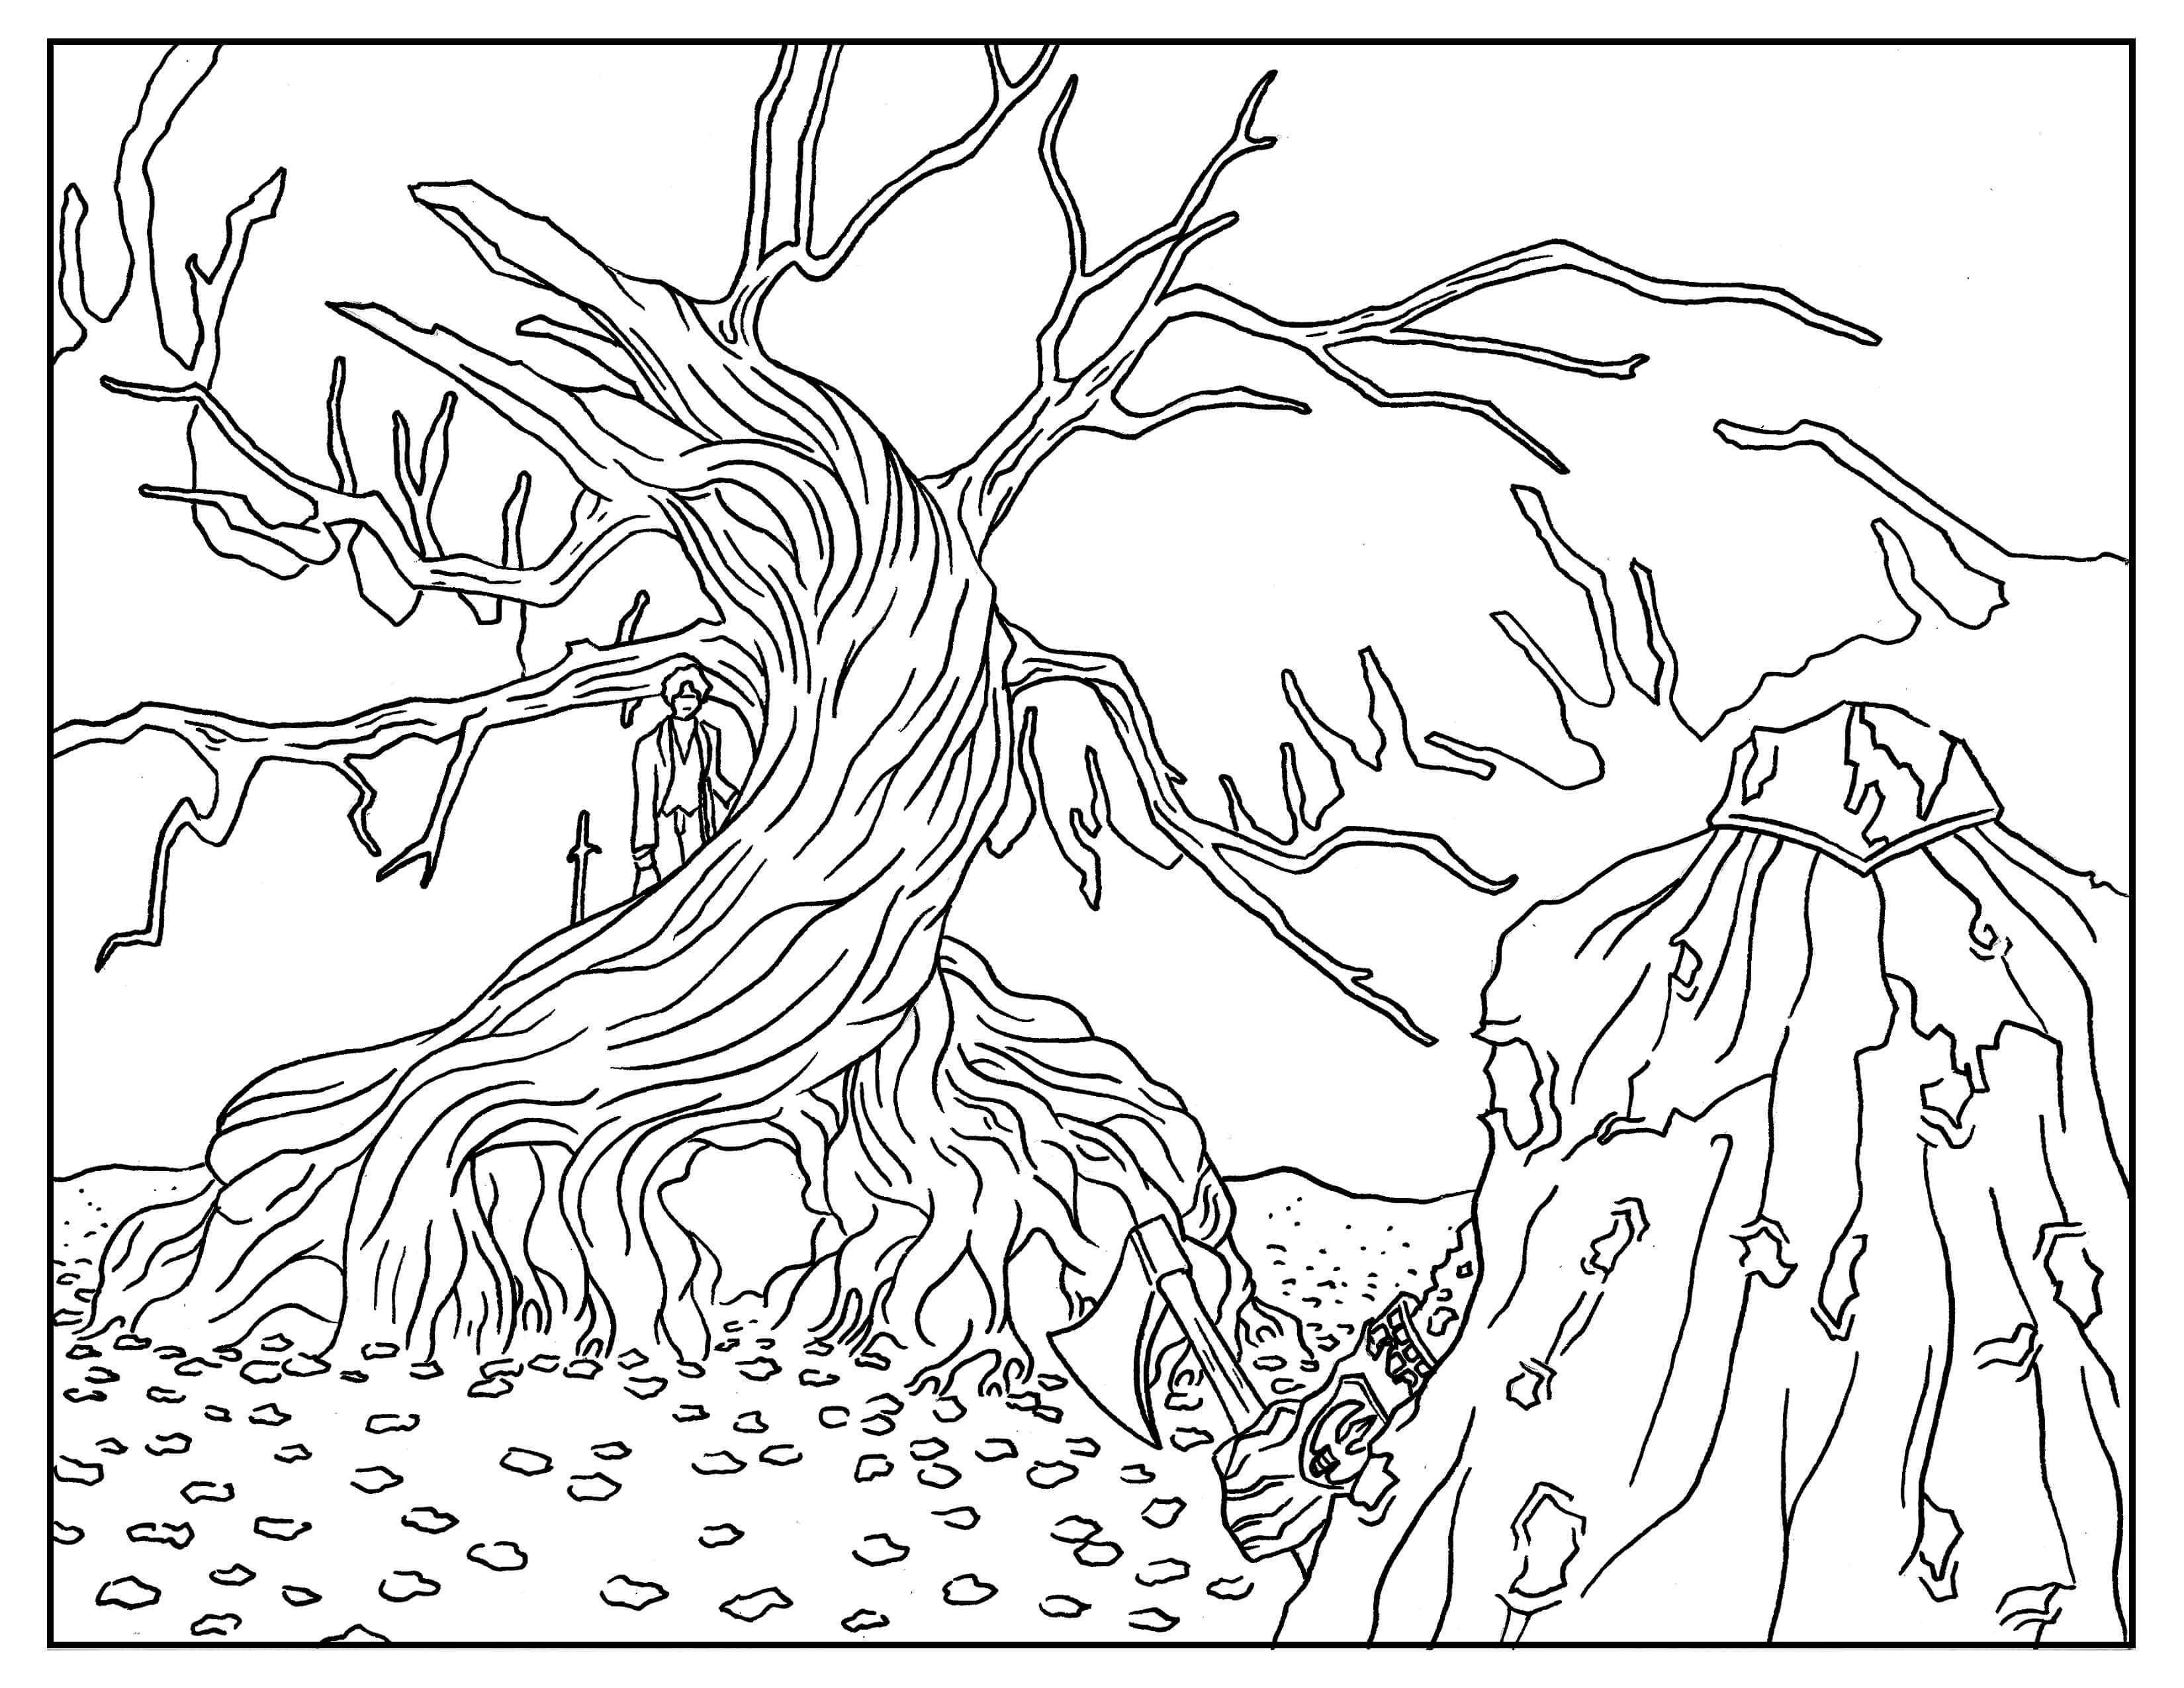 Coloring page inspired by Tim Burton's movie Sleepy Hollow, with Johnny Depp